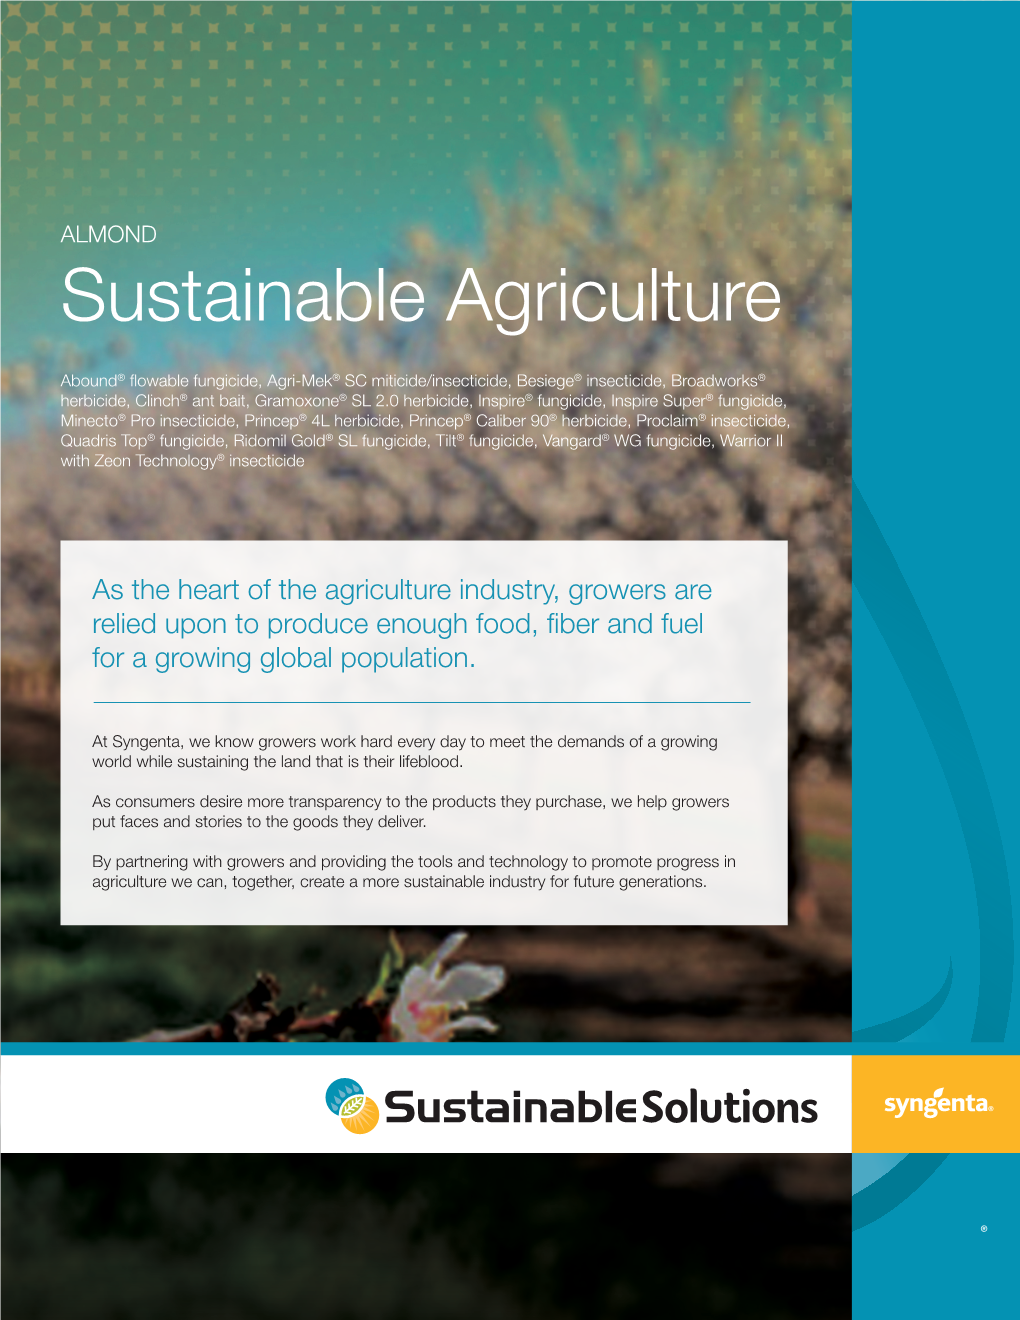 Sustainable Agriculture